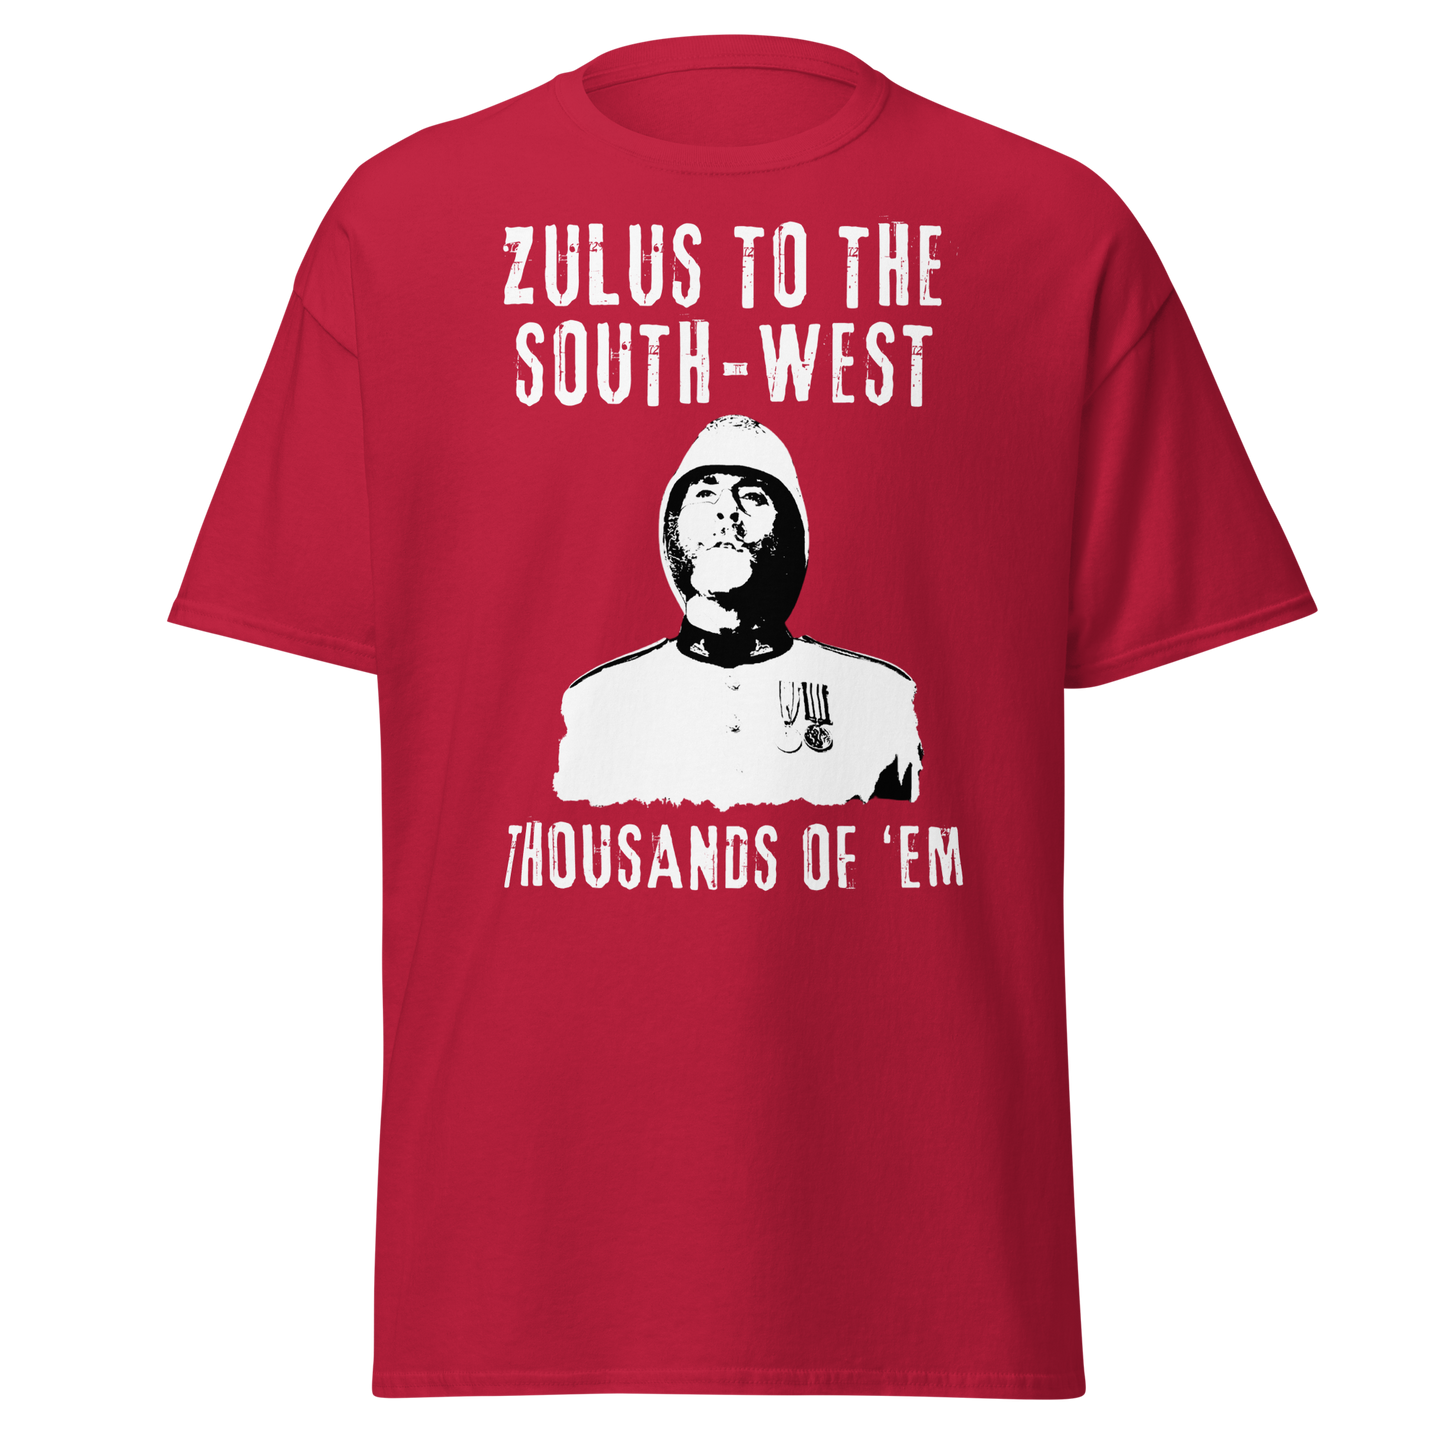 Zulus To The South-West, Thousands of 'Em (t-shirt)